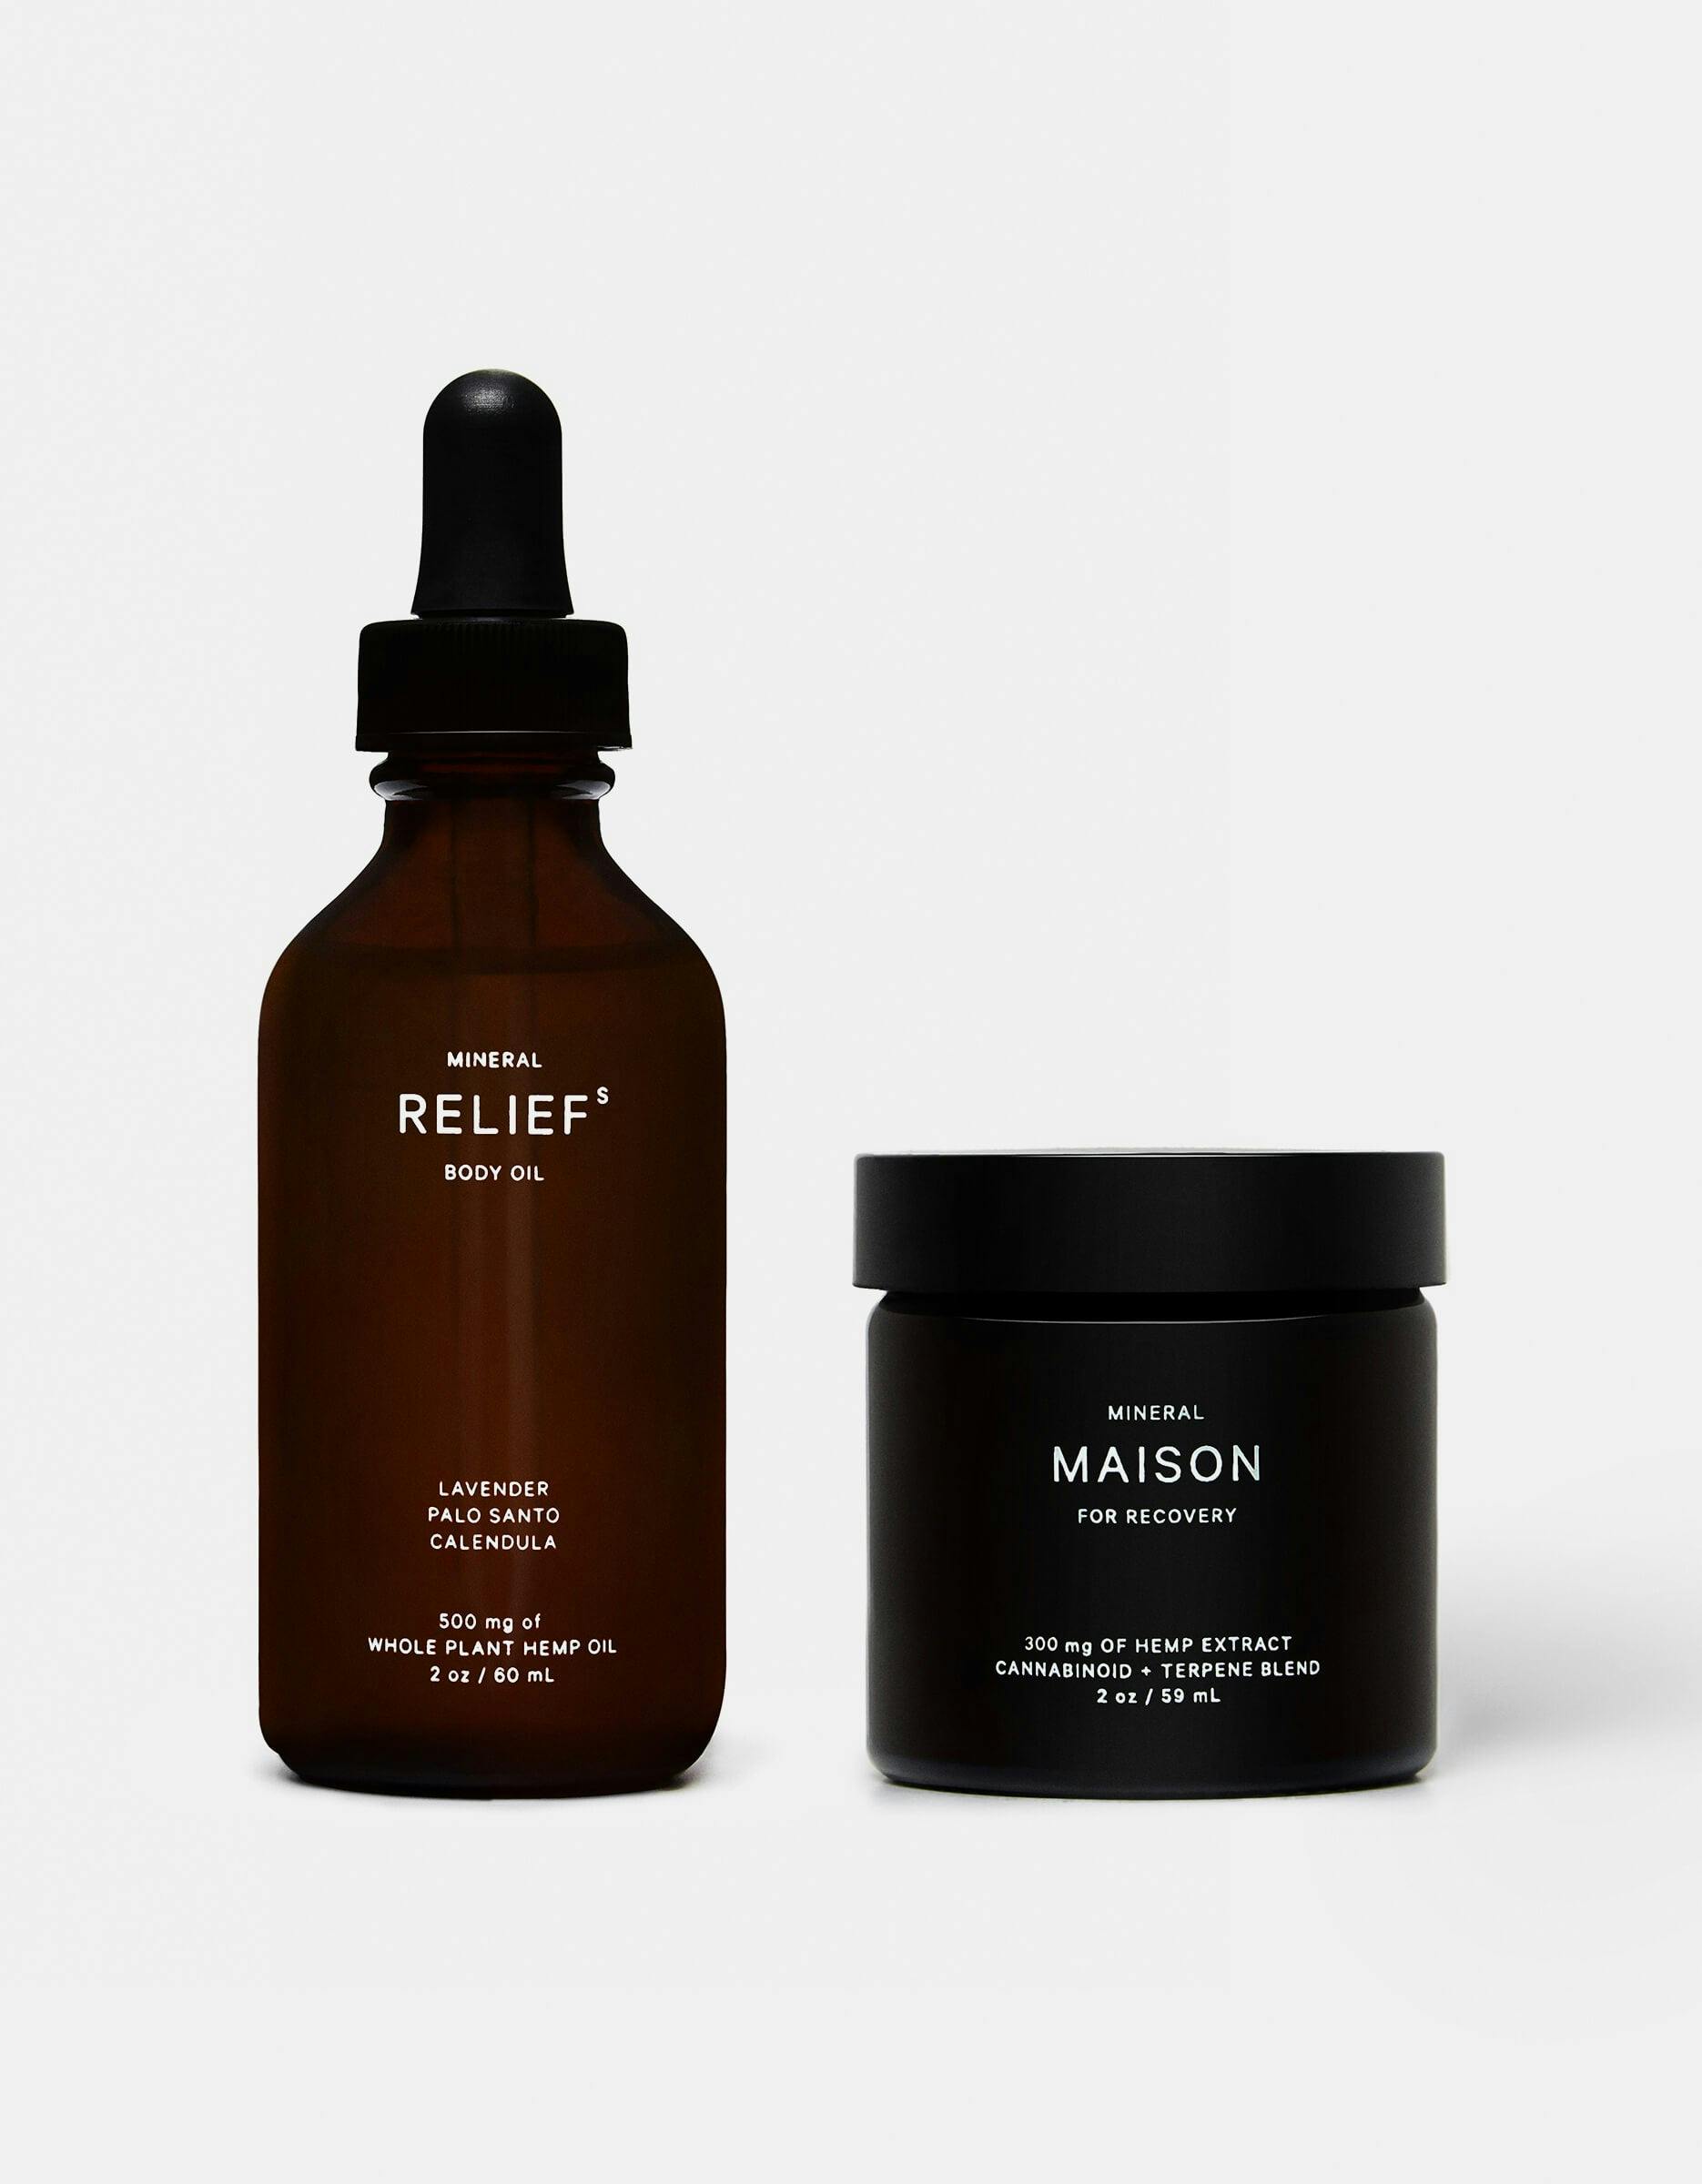 MINERAL RELIEF + RESTORE product